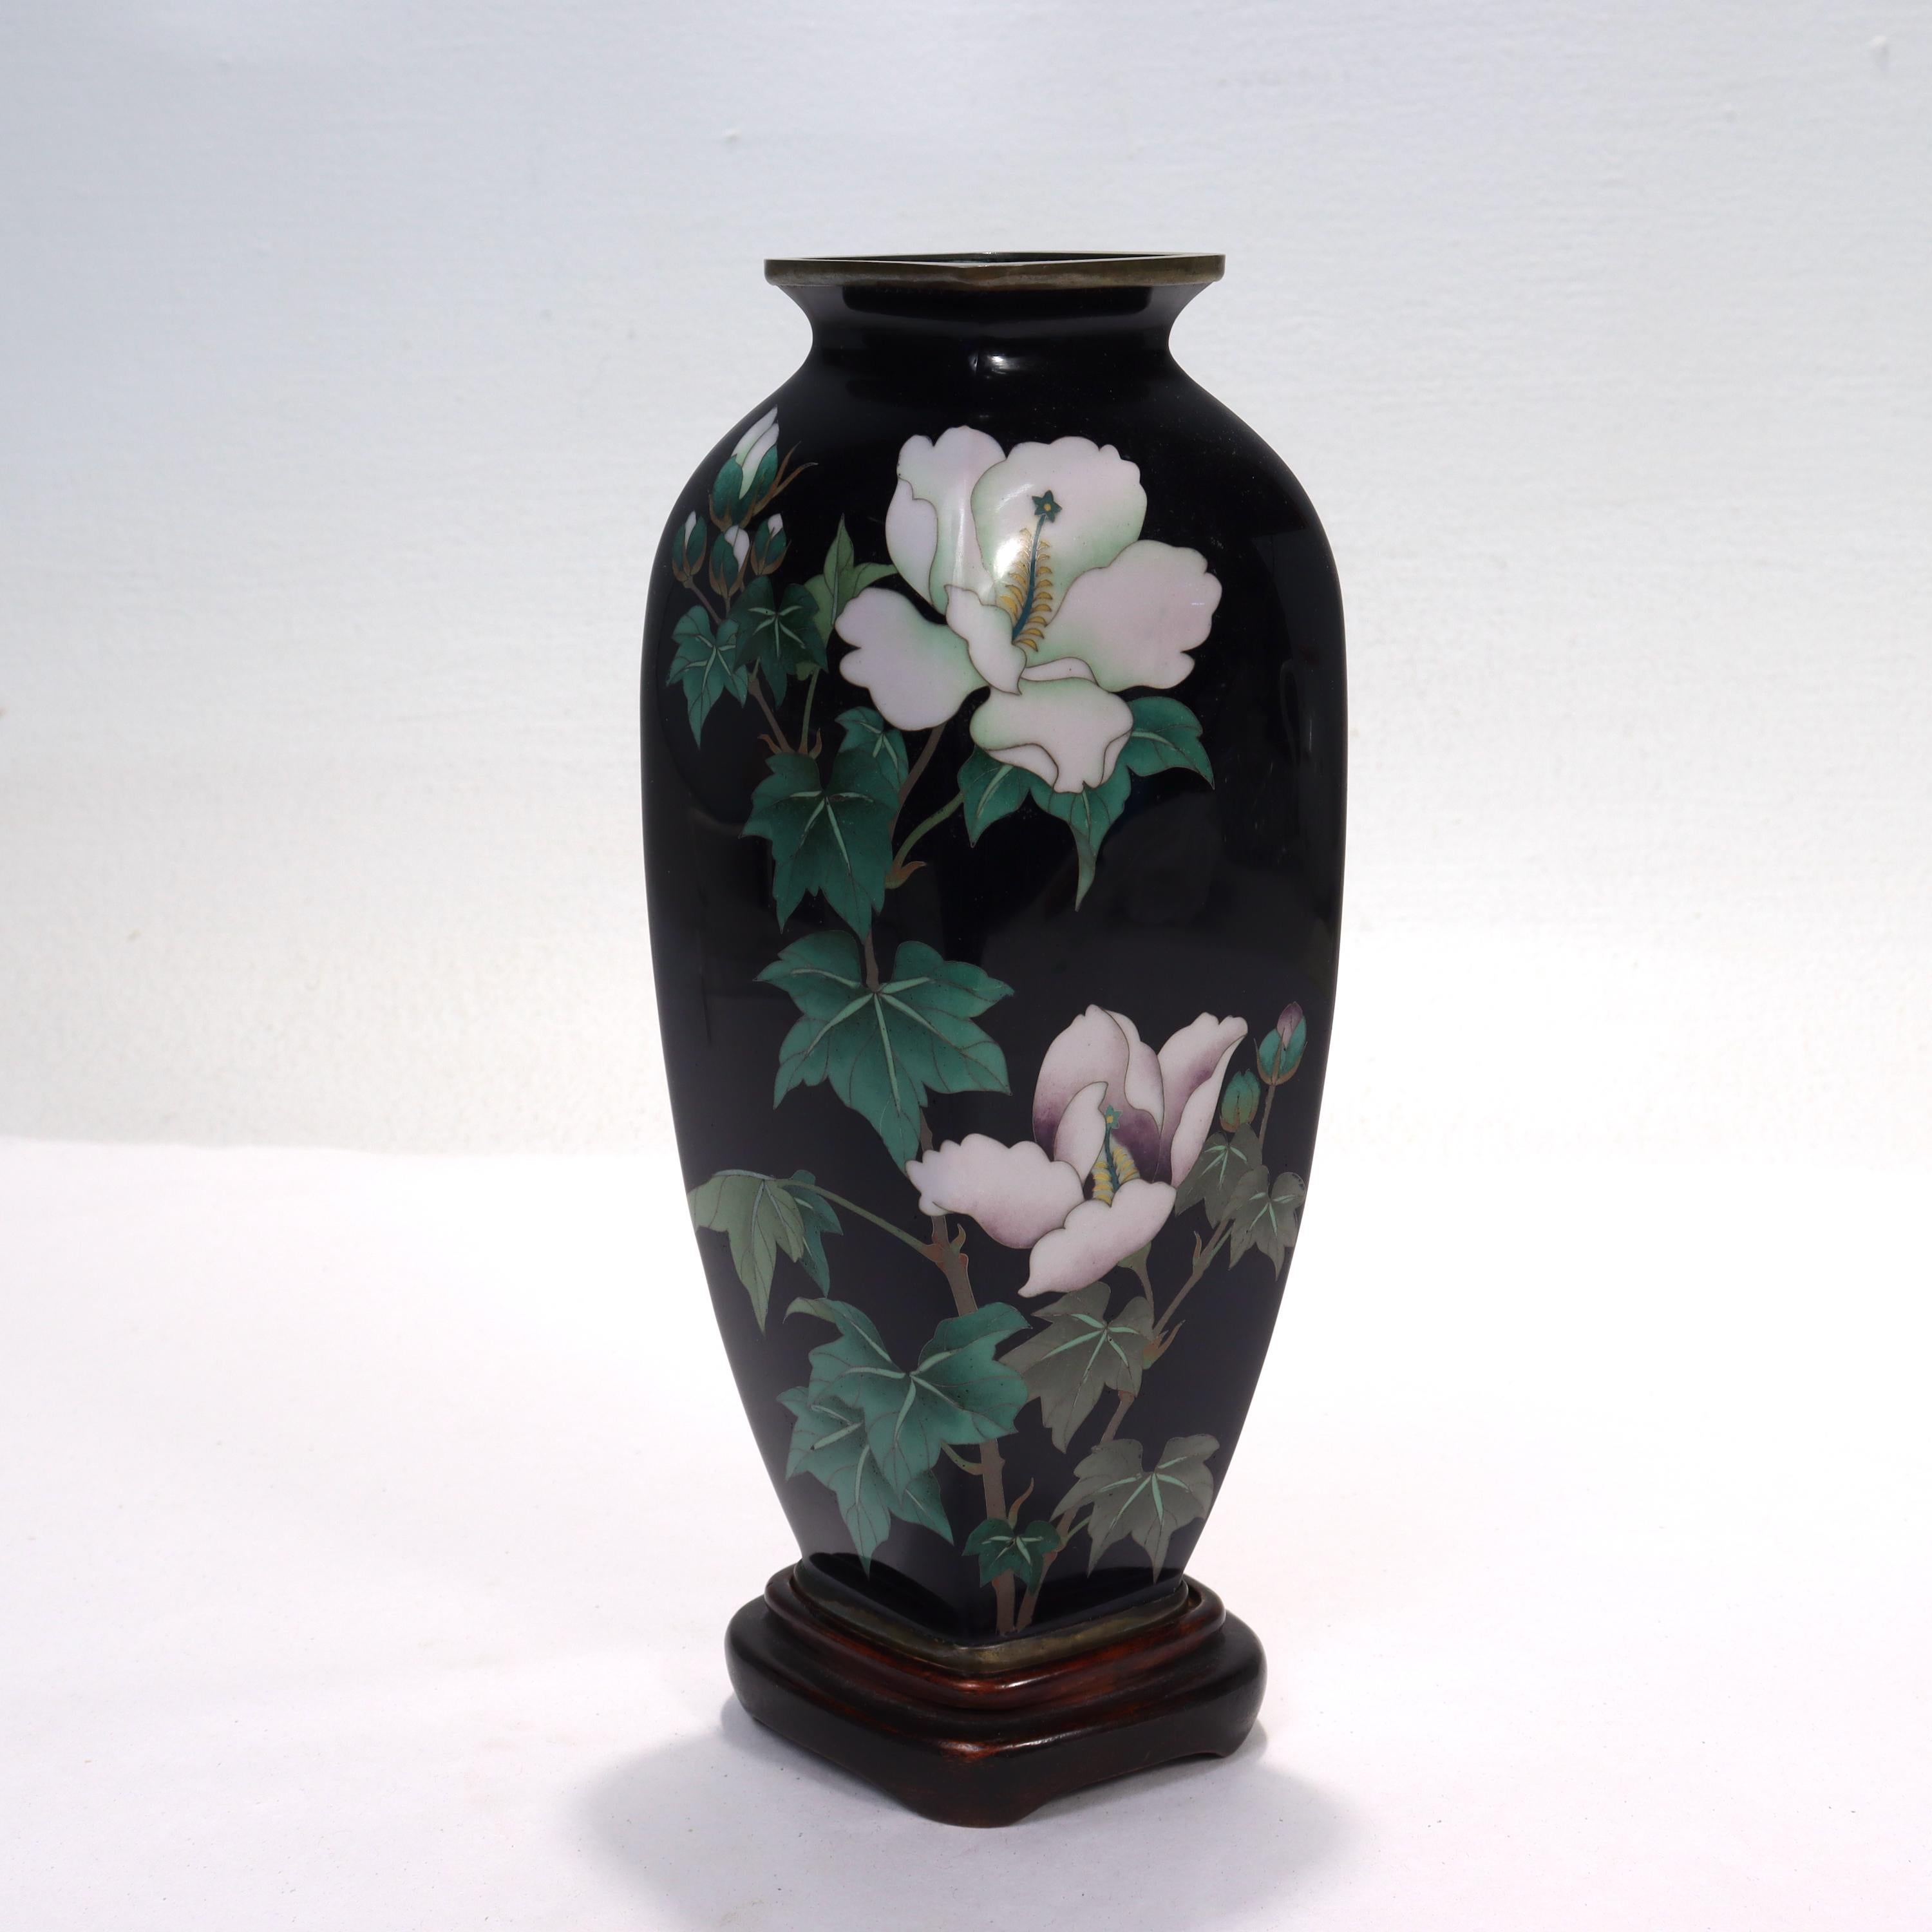 Meiji Old or Antique Japanese Wired Cloisonne Enamel Vase with White Flowers